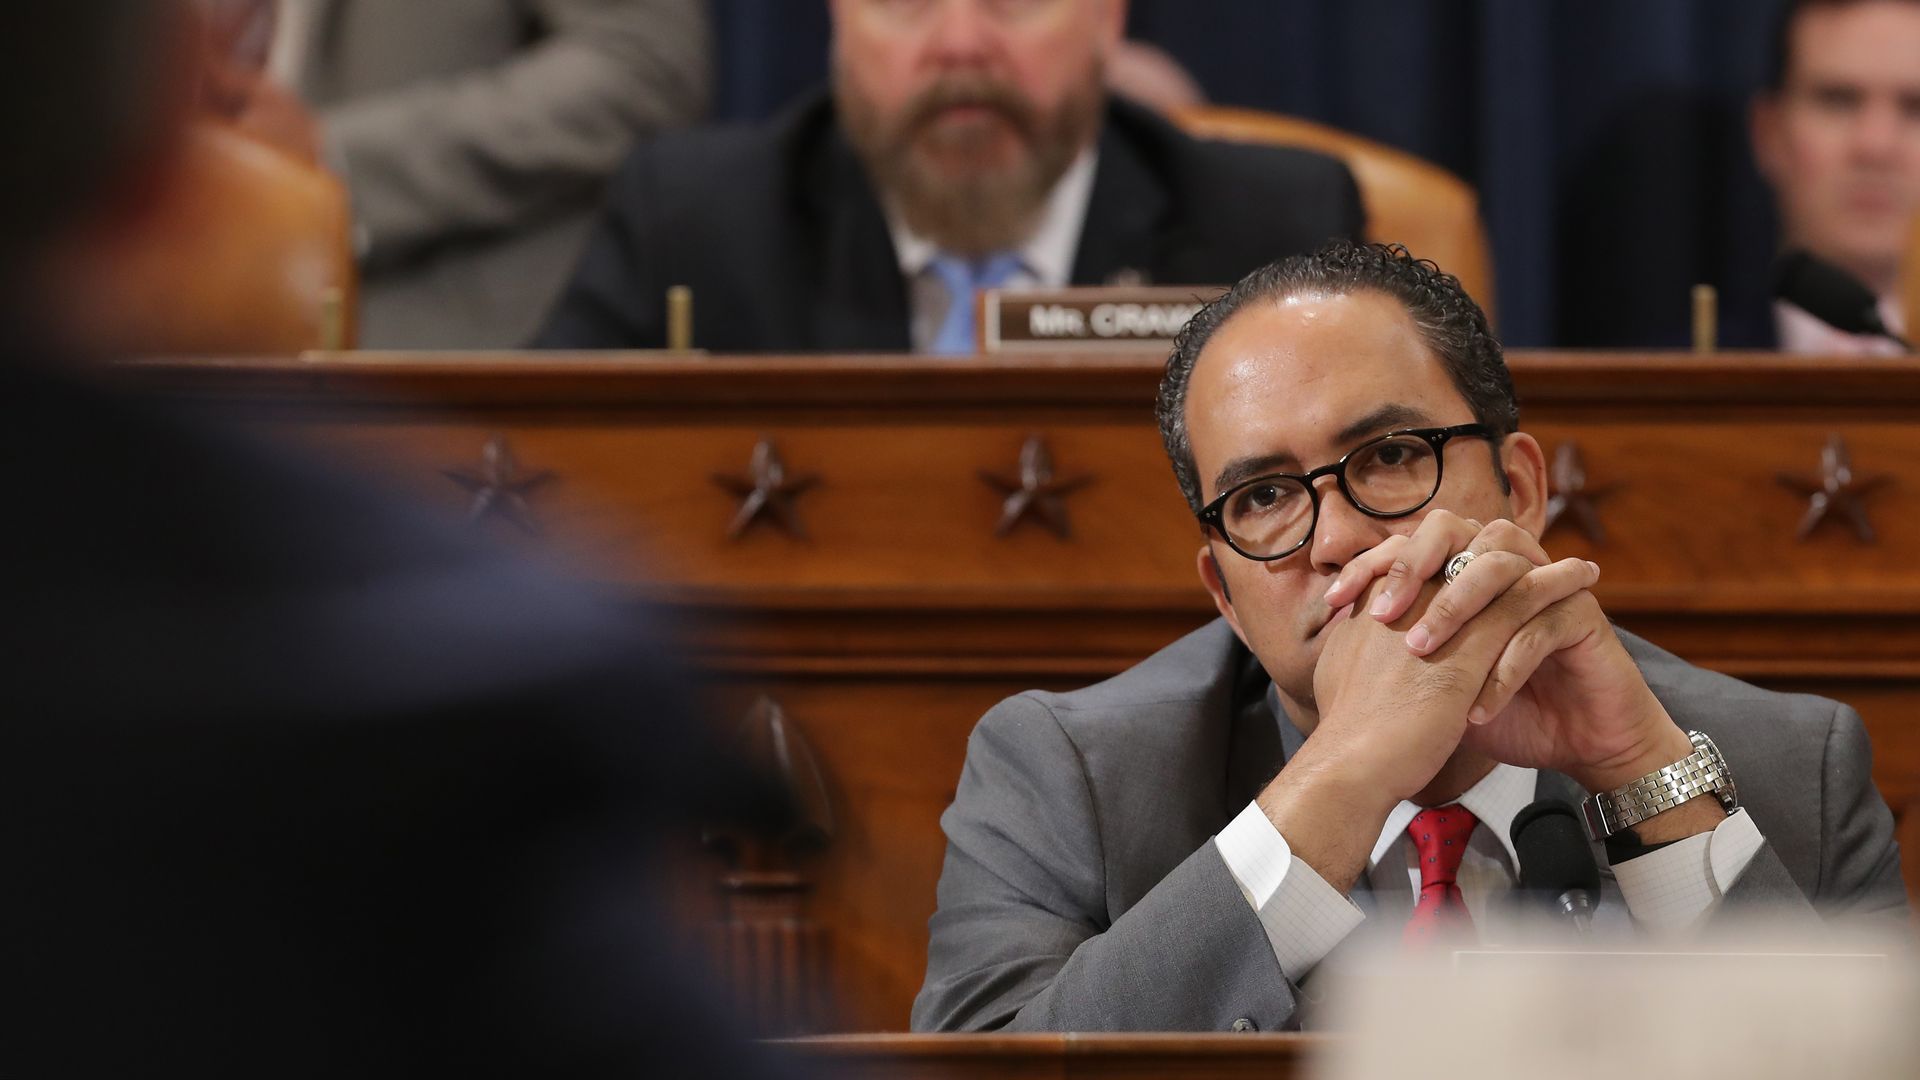 In this image, Hurd sits and listens during a hearing.